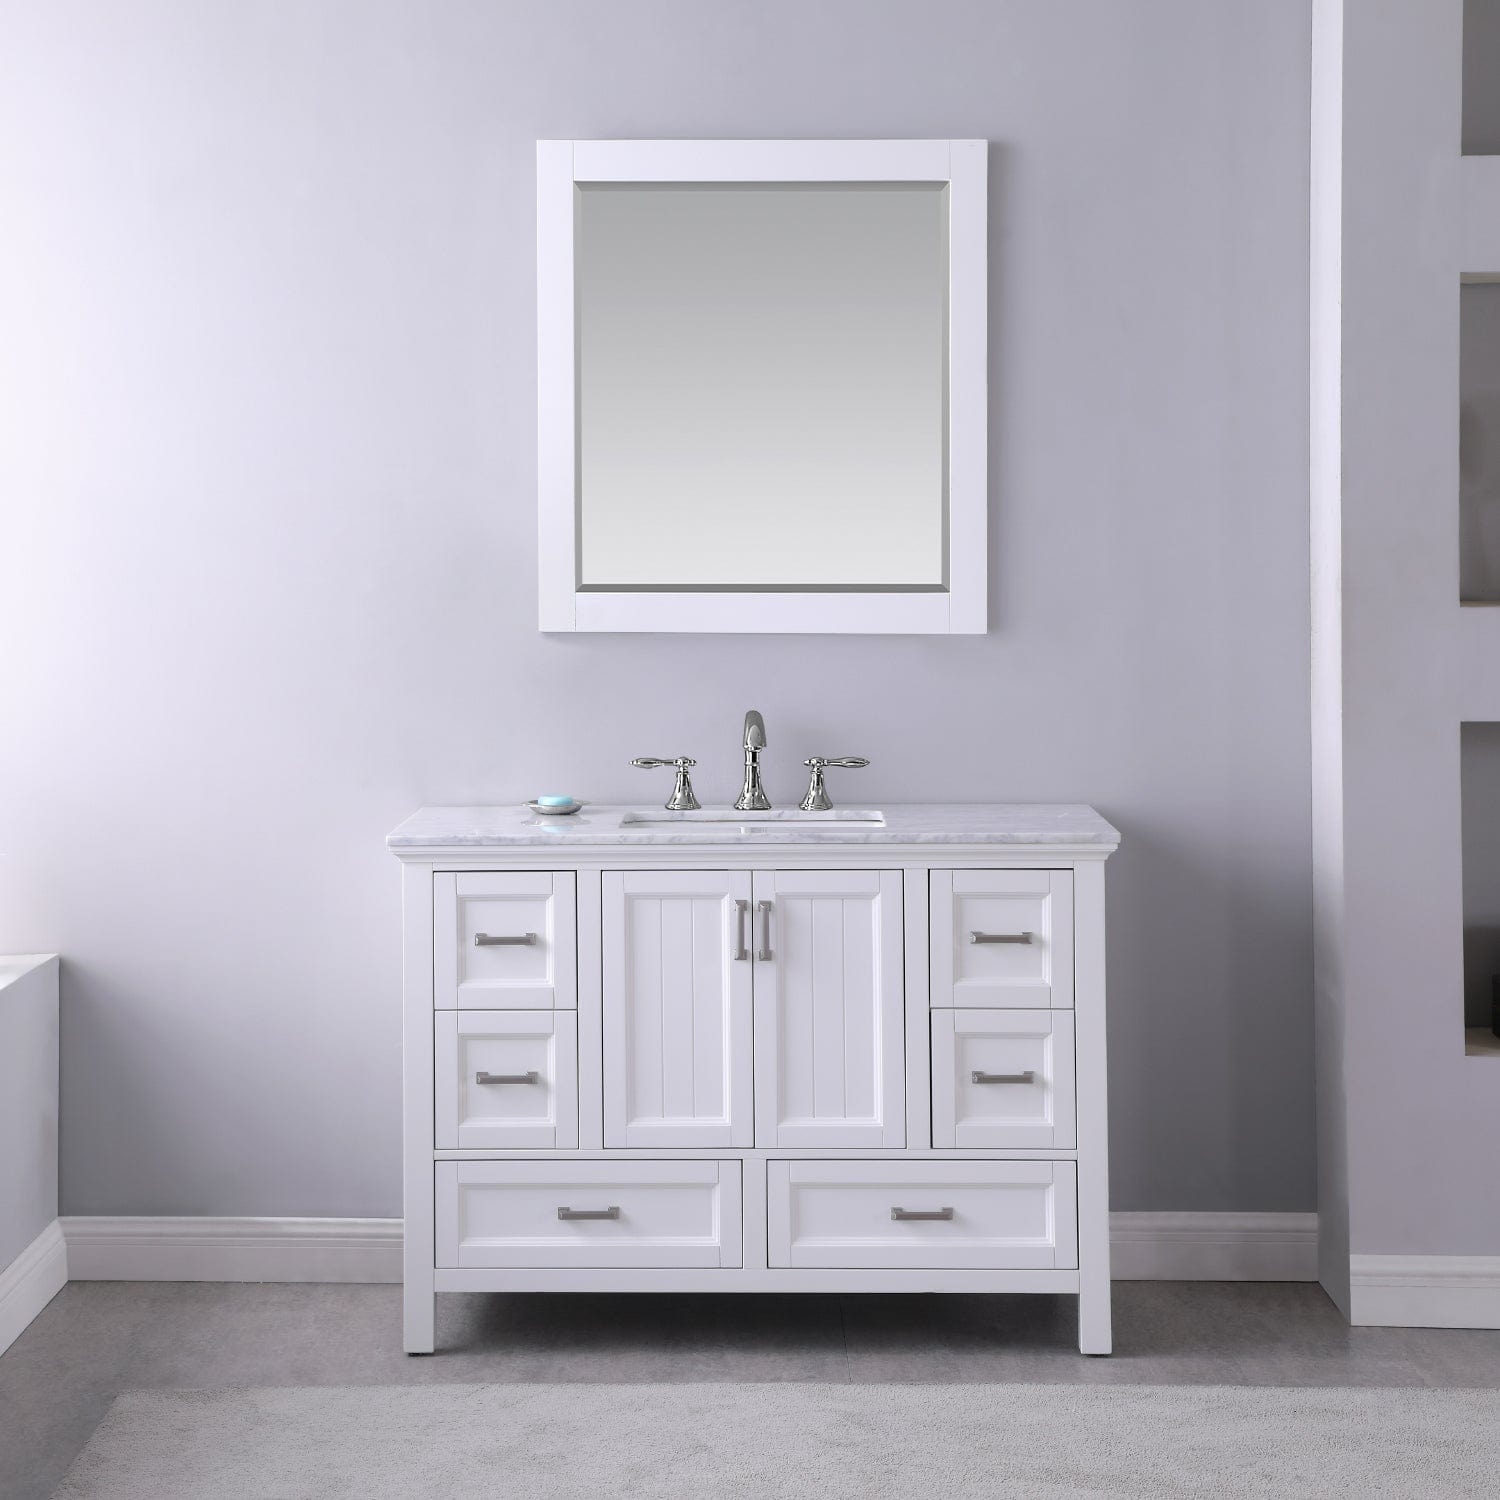 Altair Isla 48" Single Bathroom Vanity Set in White and Carrara White Marble Countertop with Mirror 538048-WH-CA - Molaix631112970877Vanity538048-WH-CA